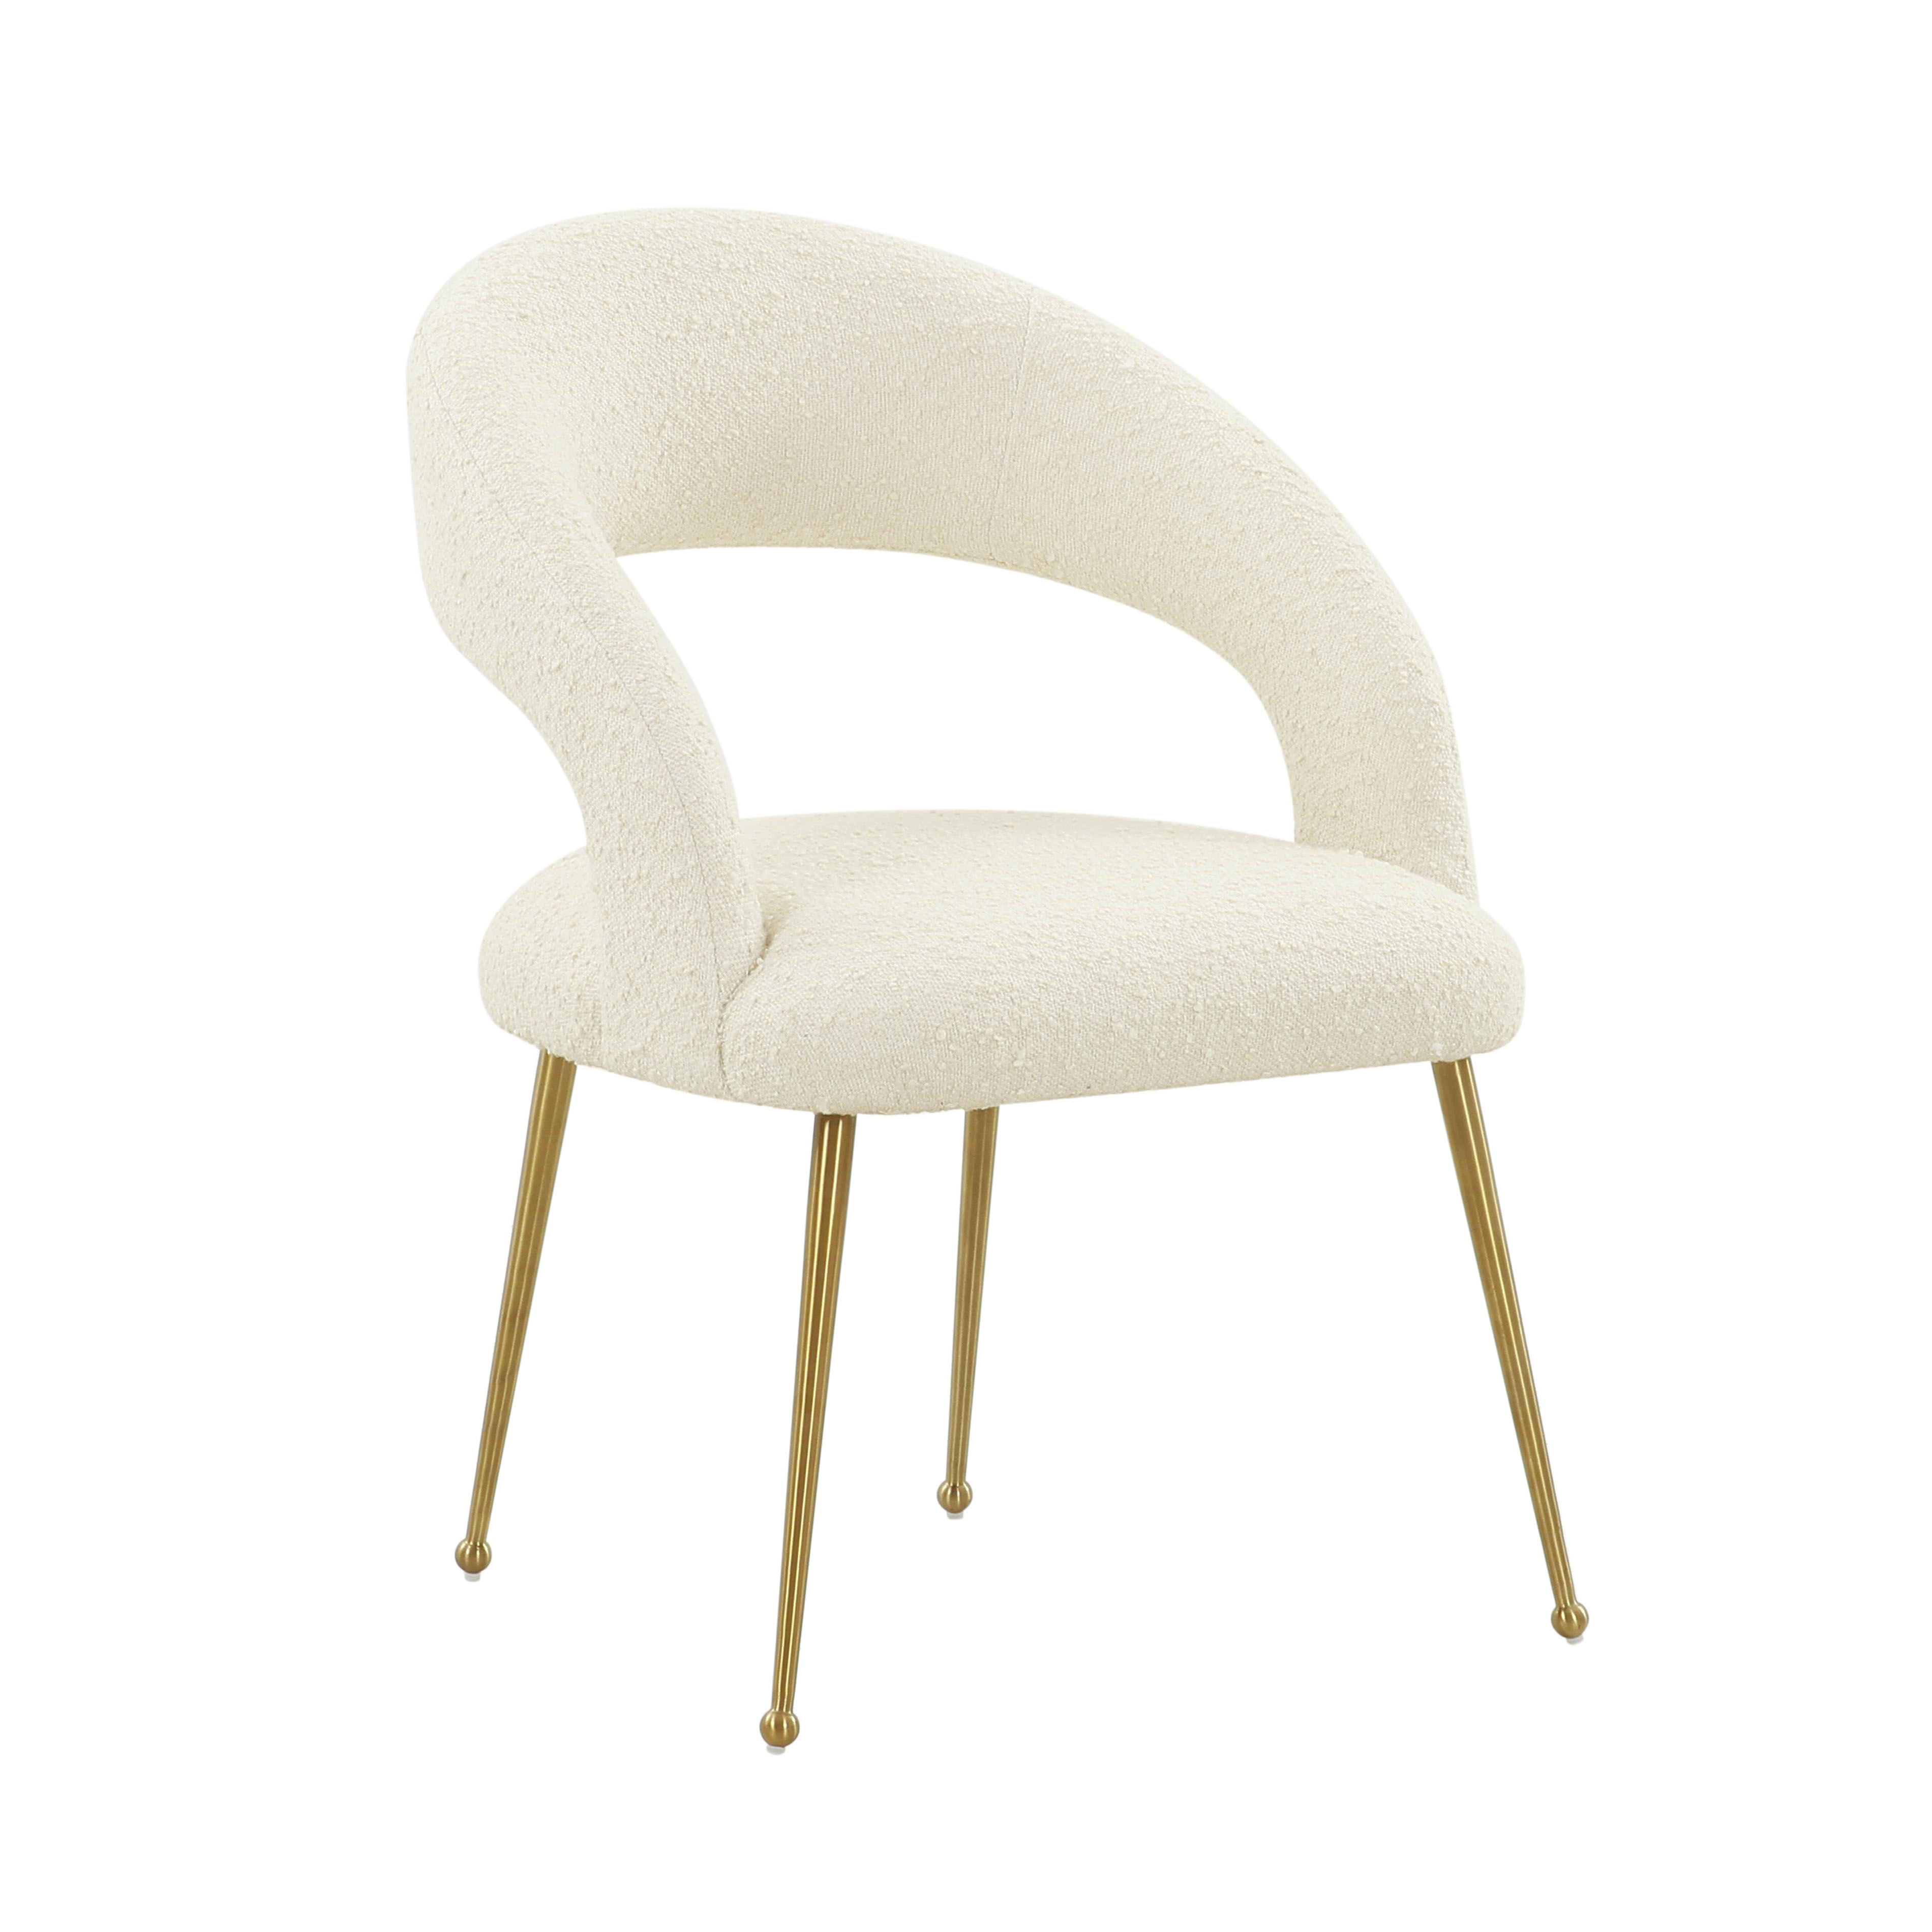 Rocco Cream Boucle Dining chair - TOV-D68535